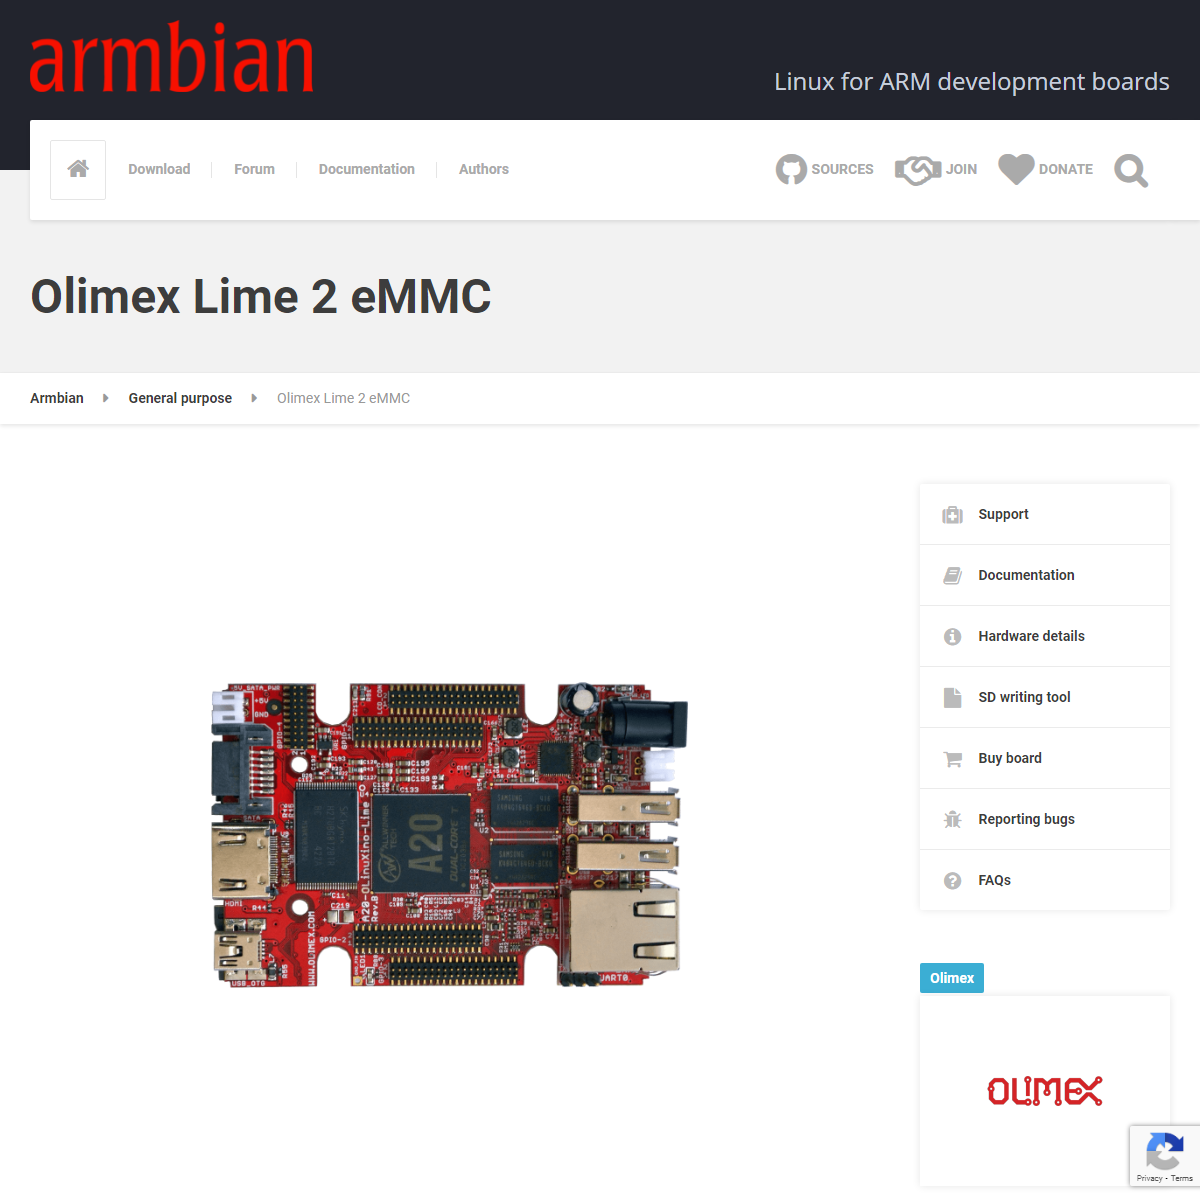 A complete backup of https://www.armbian.com/olimex-lime-2-emmc/